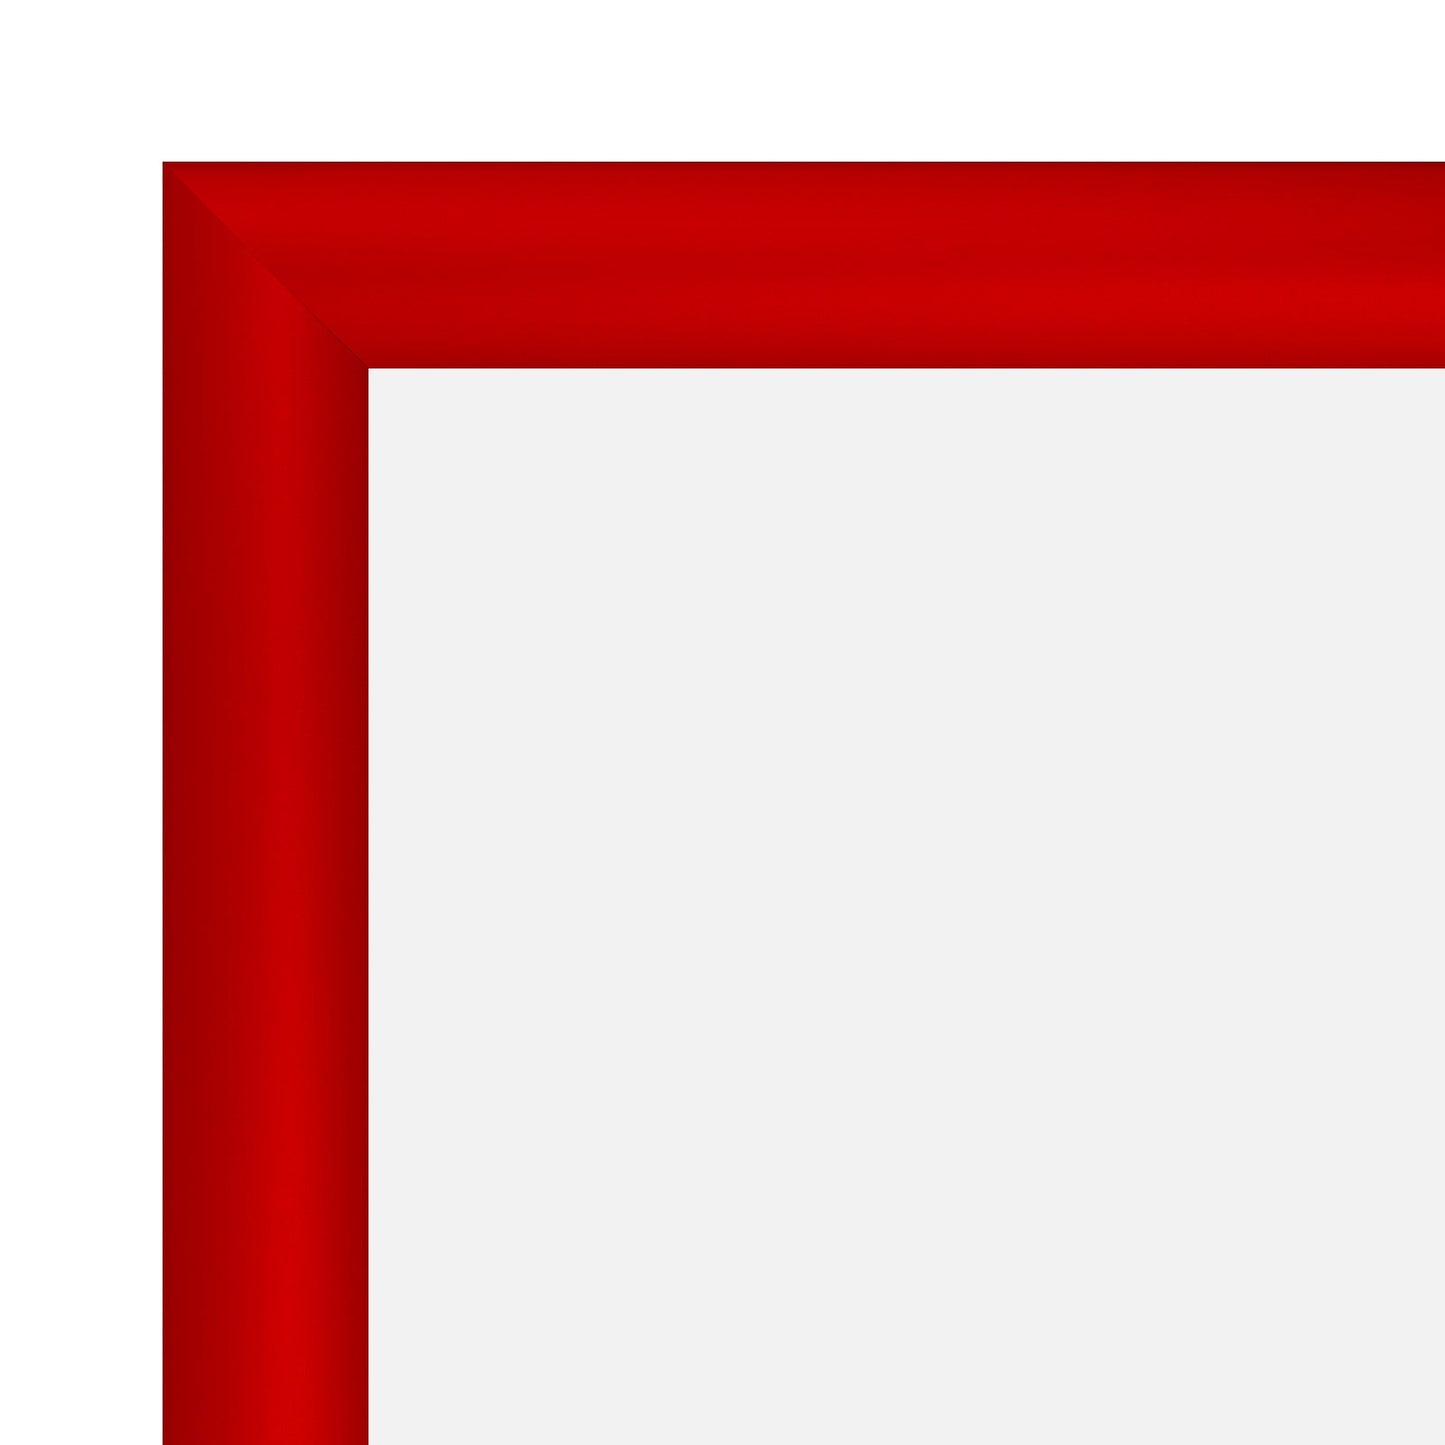 10x13 Red SnapeZo® Snap Frame - 1.2" Profile